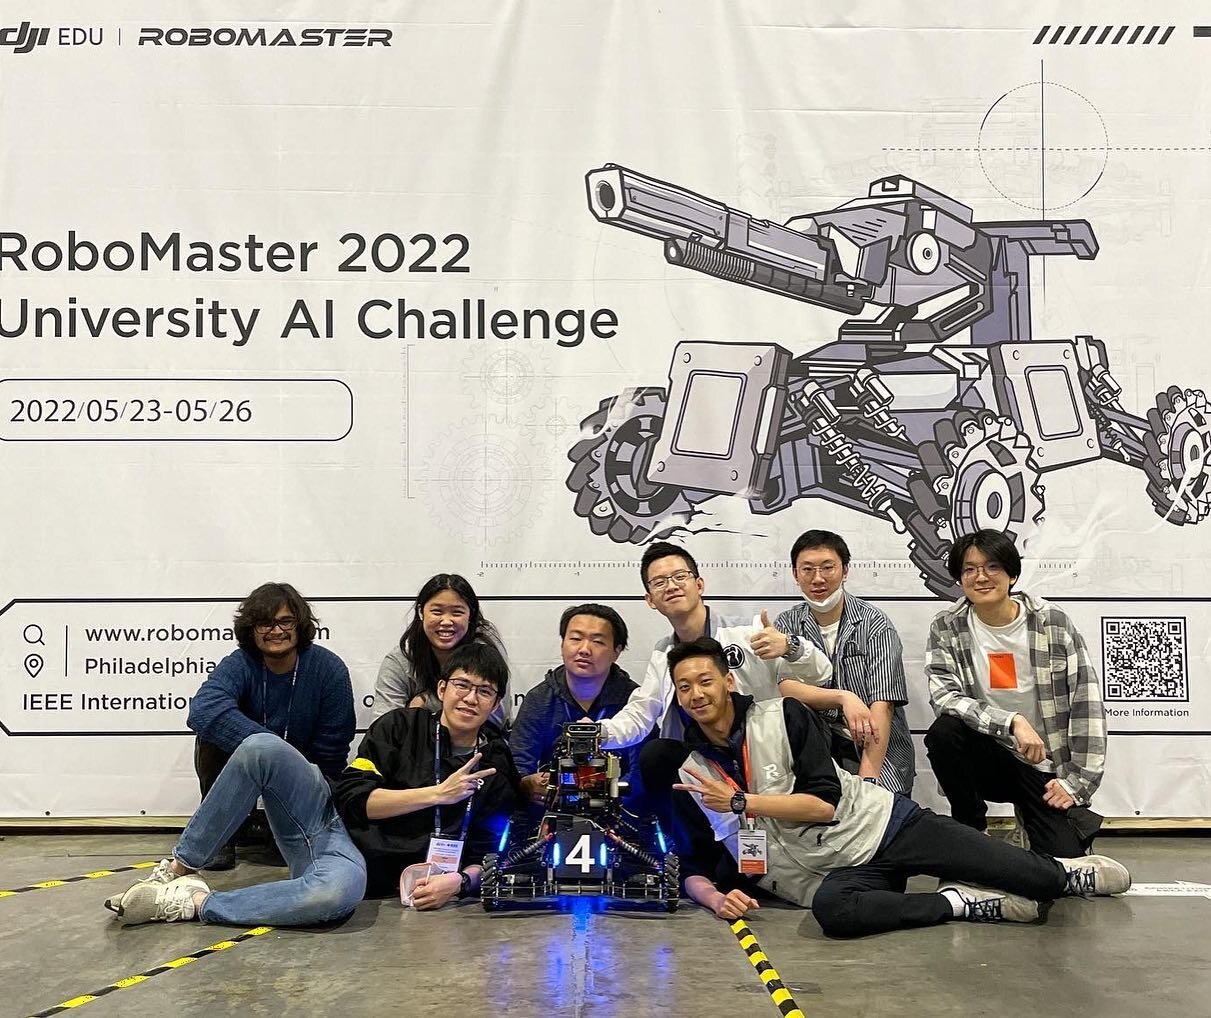 #icra2022 was a success! It was a pleasure to compete with you @pennstaterobox @vt_robogrinder and @illinois1867 See you all at @tamu this June 🦾

@exyntech @johndeere @psyonicinc @cogniteam_official it was such an honor to meet such enthusiastic pe